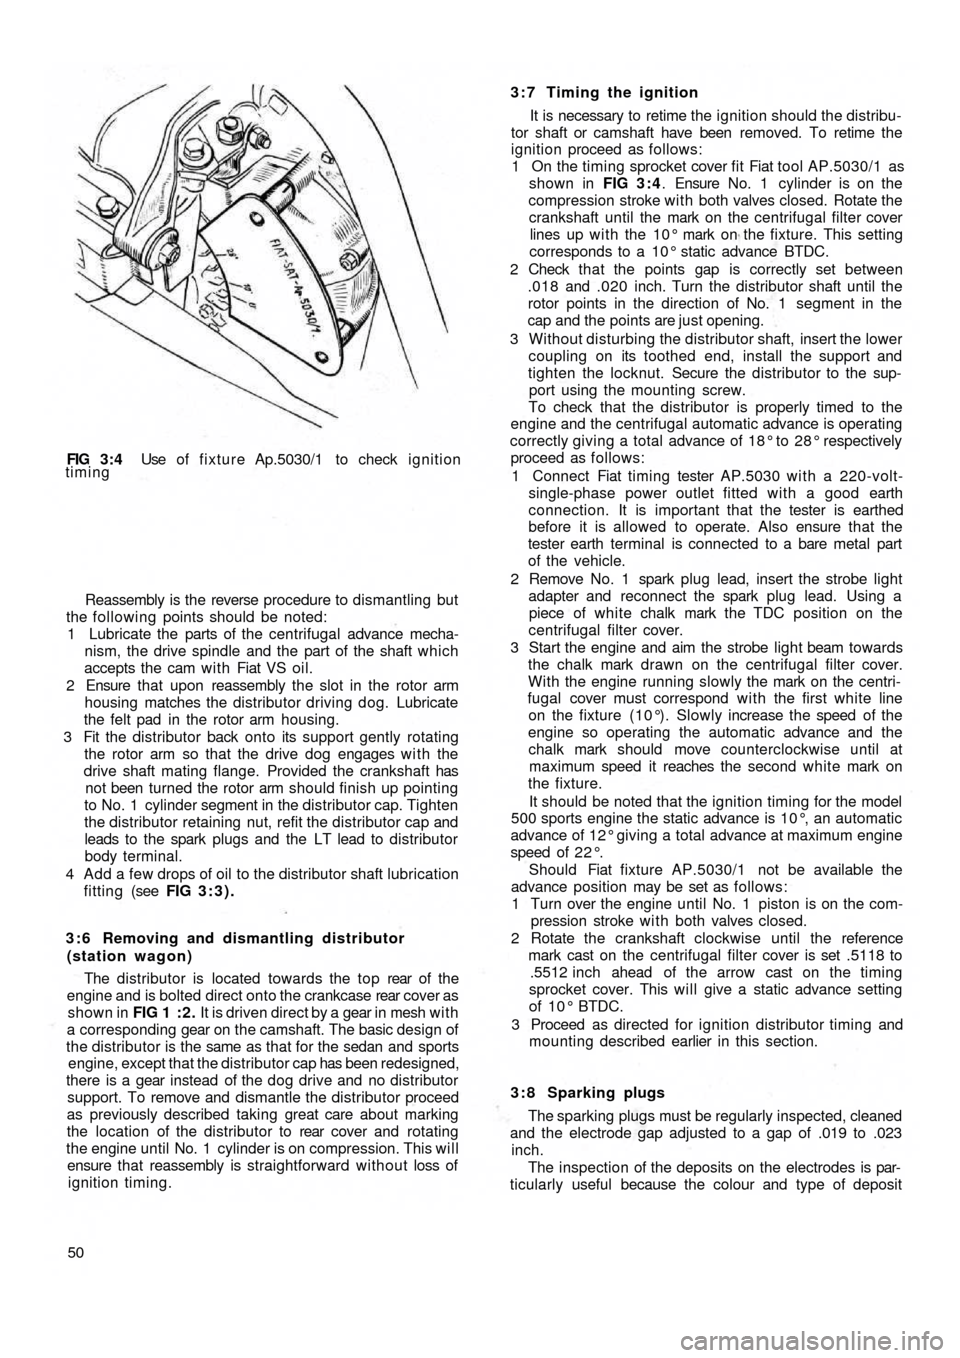 FIAT 500 1969 1.G Service Manual FIG  3 : 4  Use of fixture Ap.5030/1 to check ignition
timing
Reassembly is the reverse procedure to dismantling but
the following points should be noted:
1 Lubricate the parts of the centrifugal adva